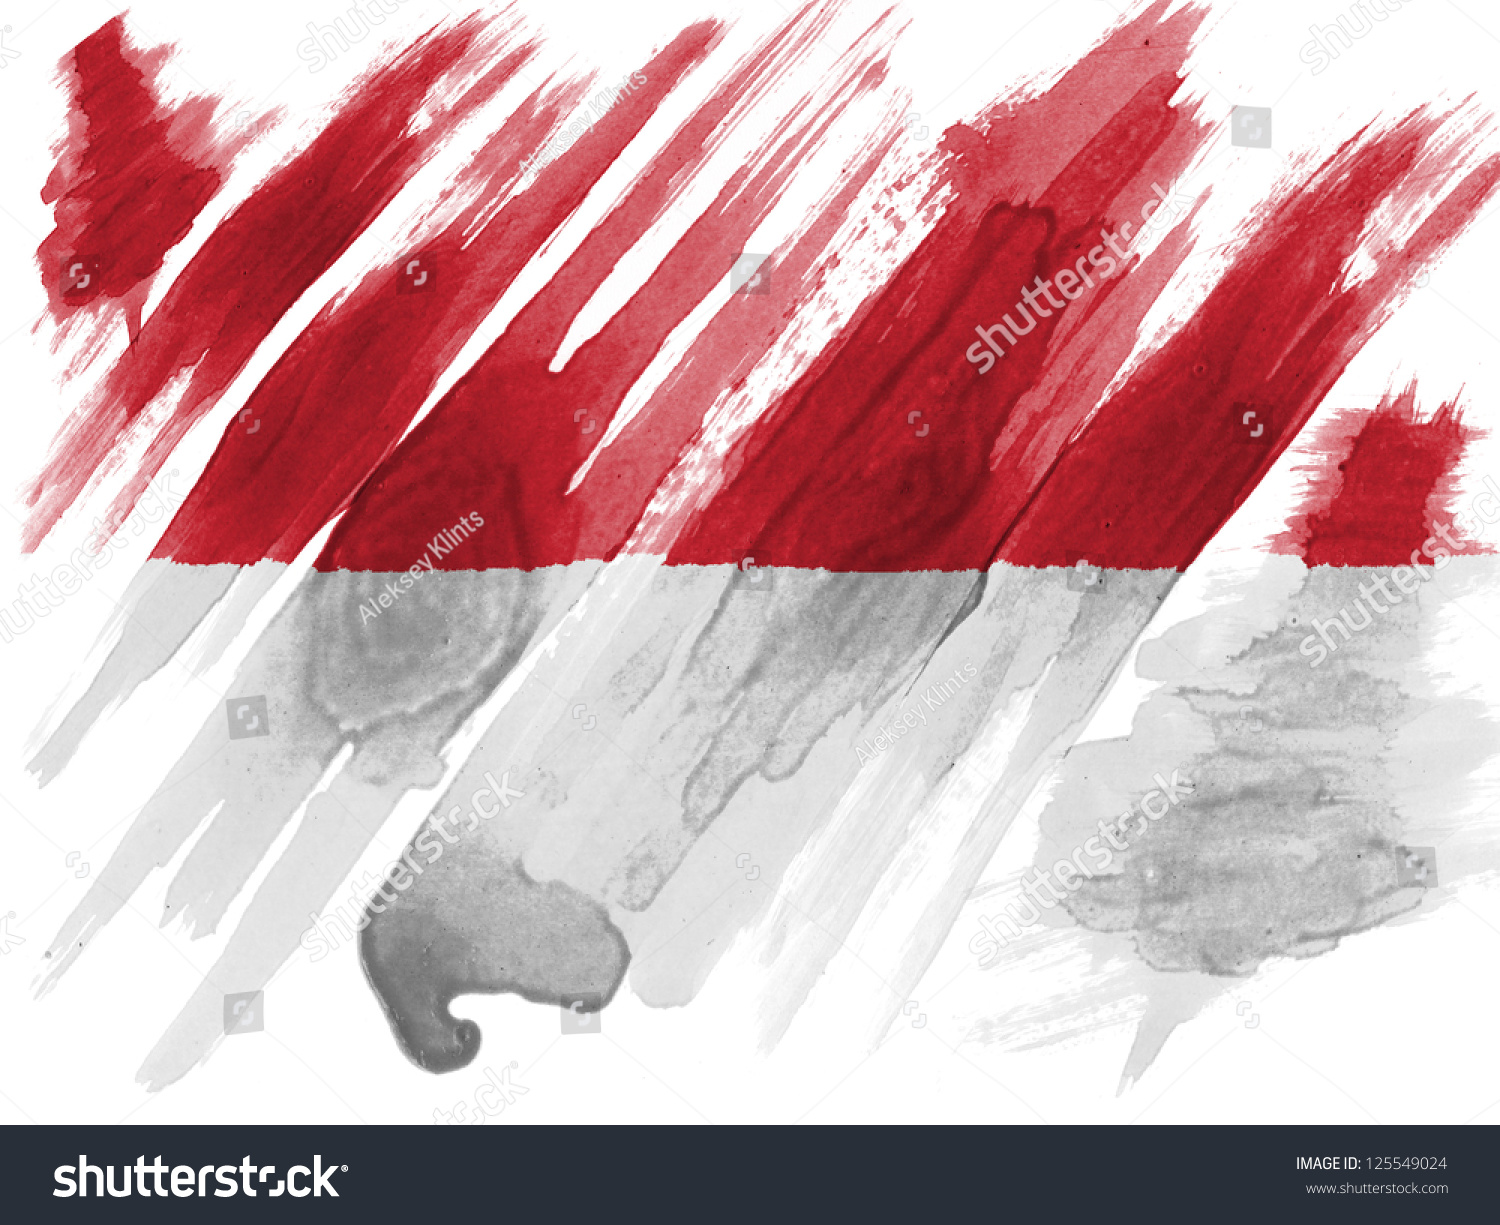 Indonesia. Indonesian Flag Painted With Watercolor On Paper Stock Photo ...